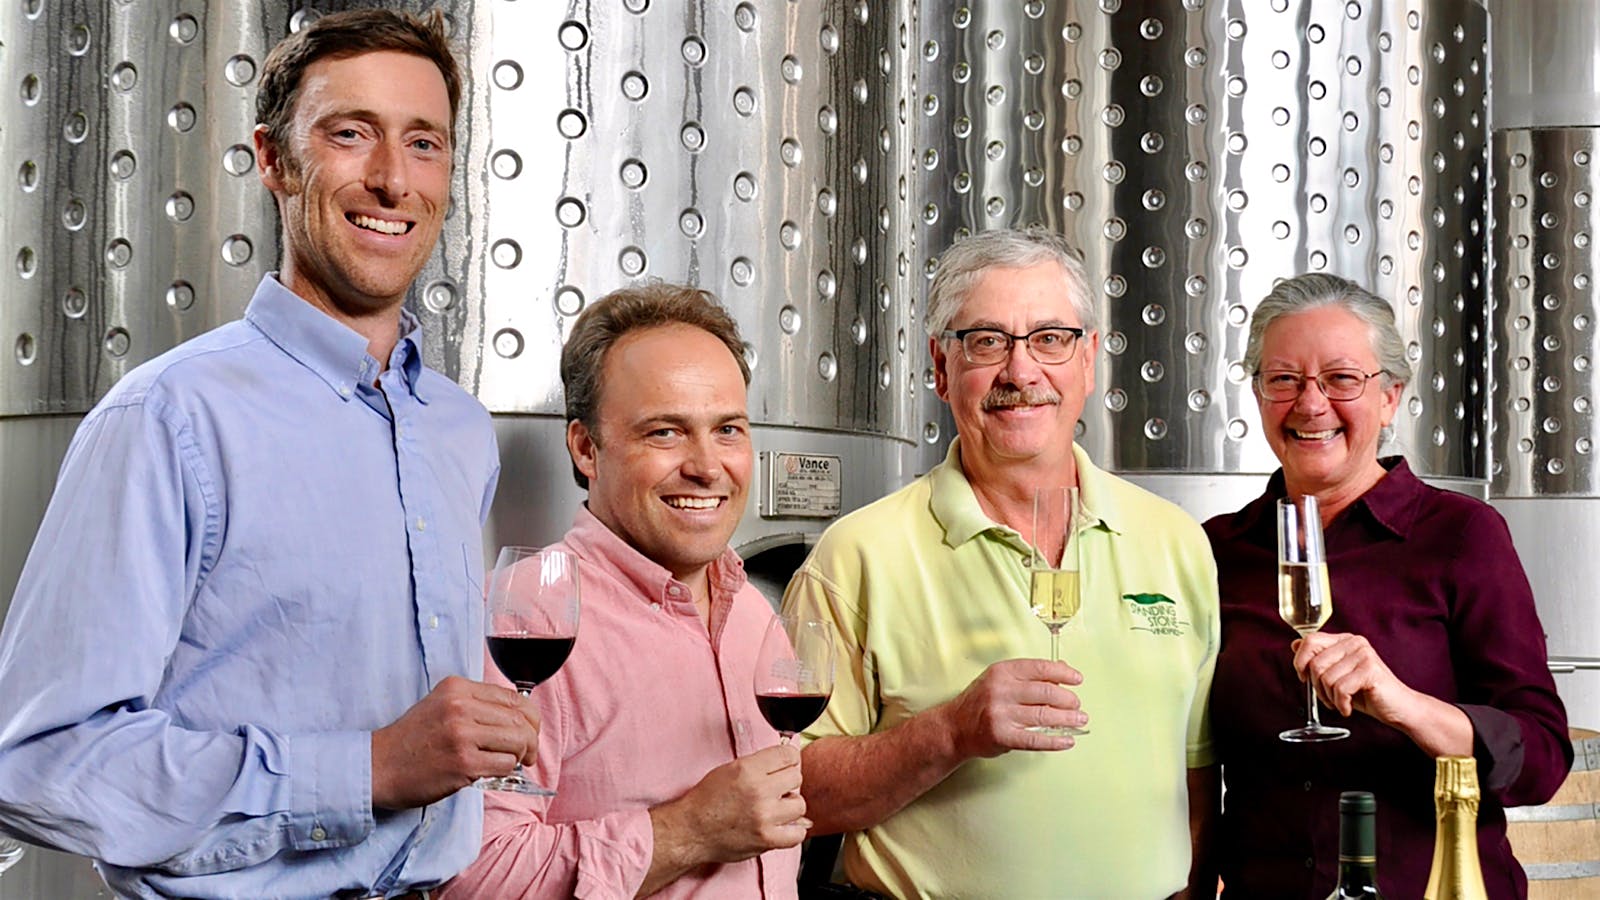 Exclusive: Owners of New York’s Hermann J. Wiemer Winery Purchase Standing Stone Vineyards